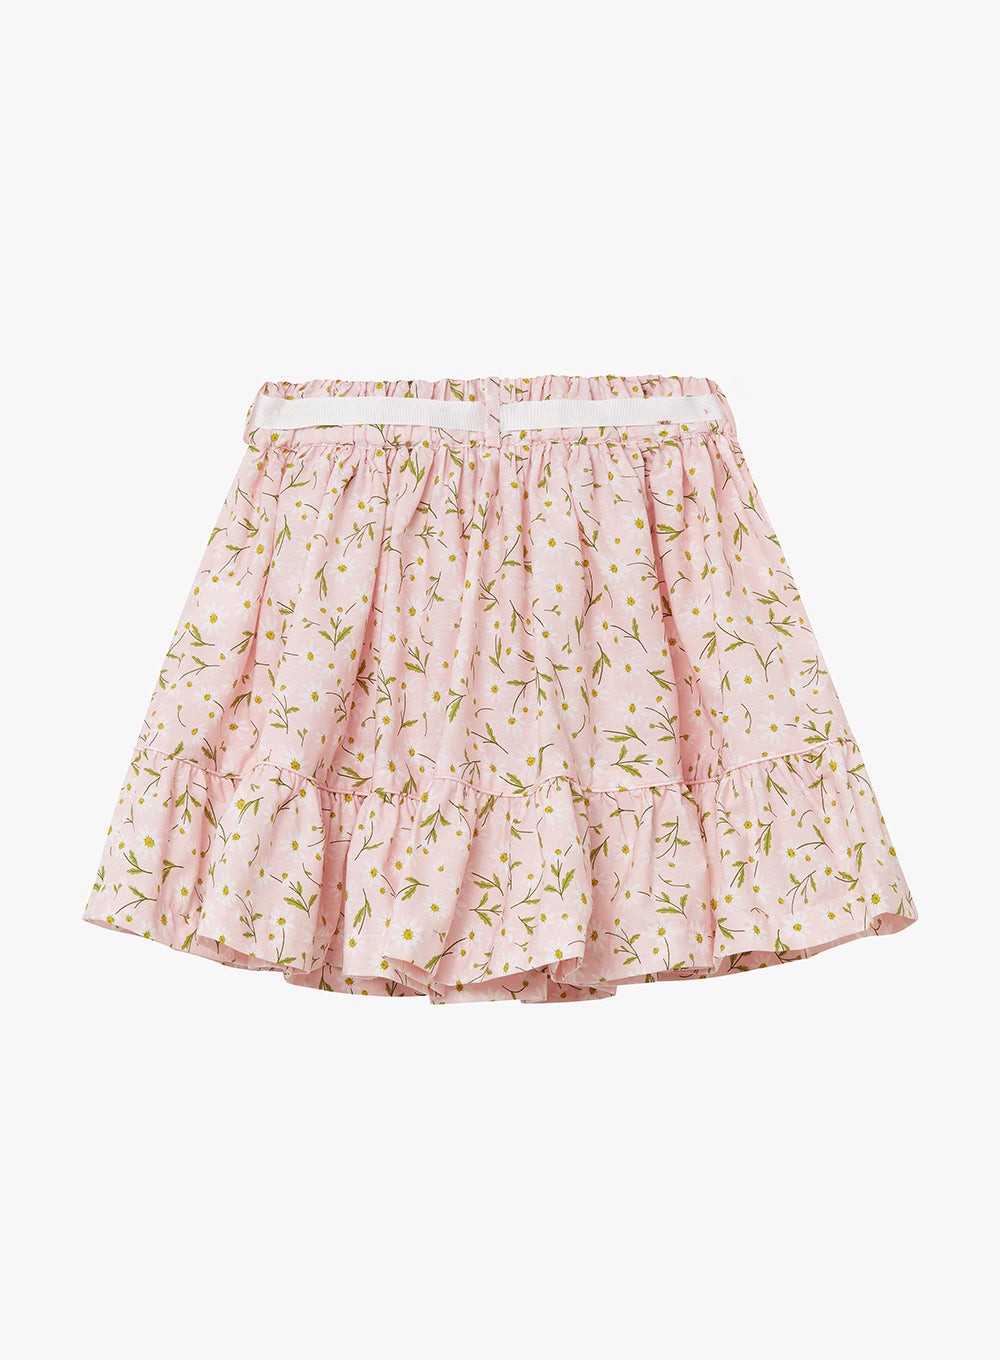 Confiture Girls Daisy Tiered Skirt Pink Daisy | Trotters London ...